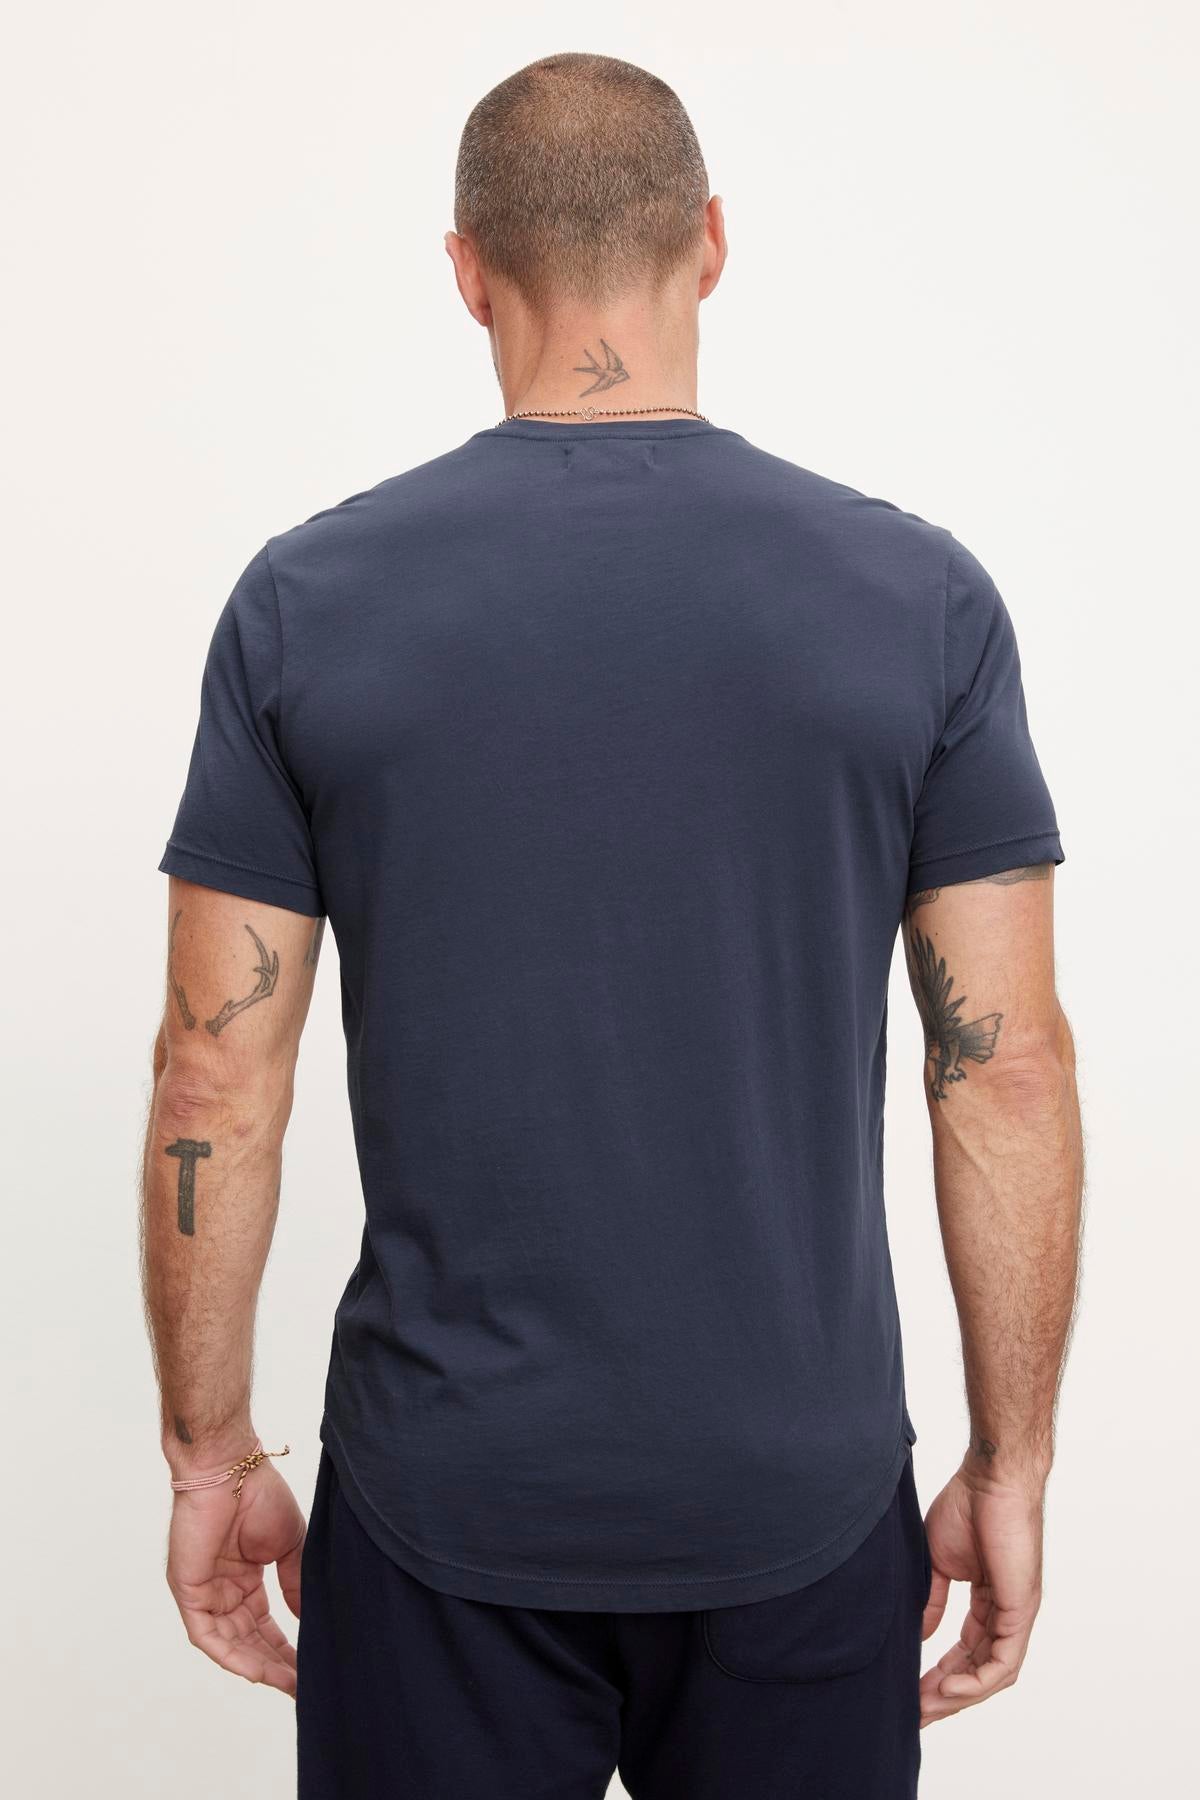 A man seen from behind wearing a dark blue Velvet by Graham & Spencer Fulton Henley tee, displaying multiple tattoos on his arms and a neck tattoo.-36753531109569